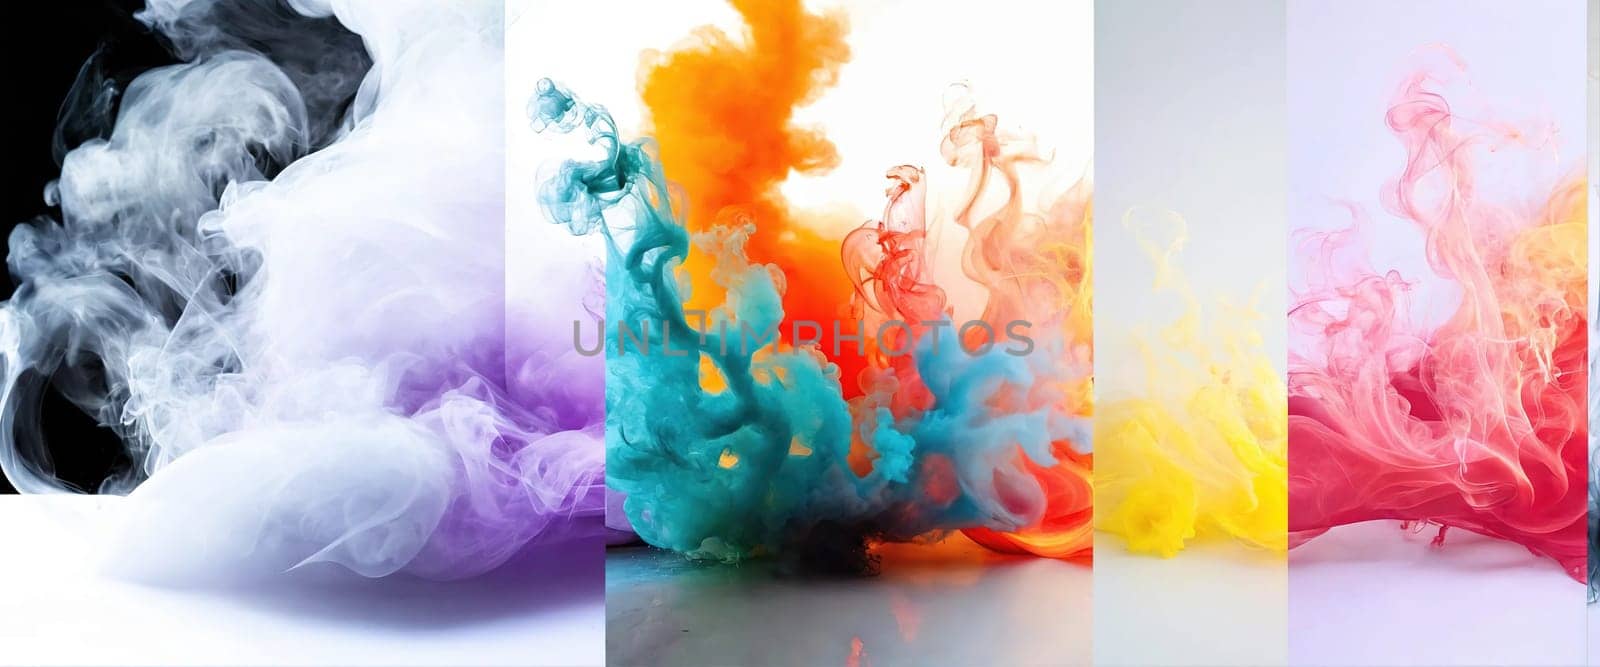 Multicolored abstract wallpaper on a white background. Smoke and waves. High quality illustration